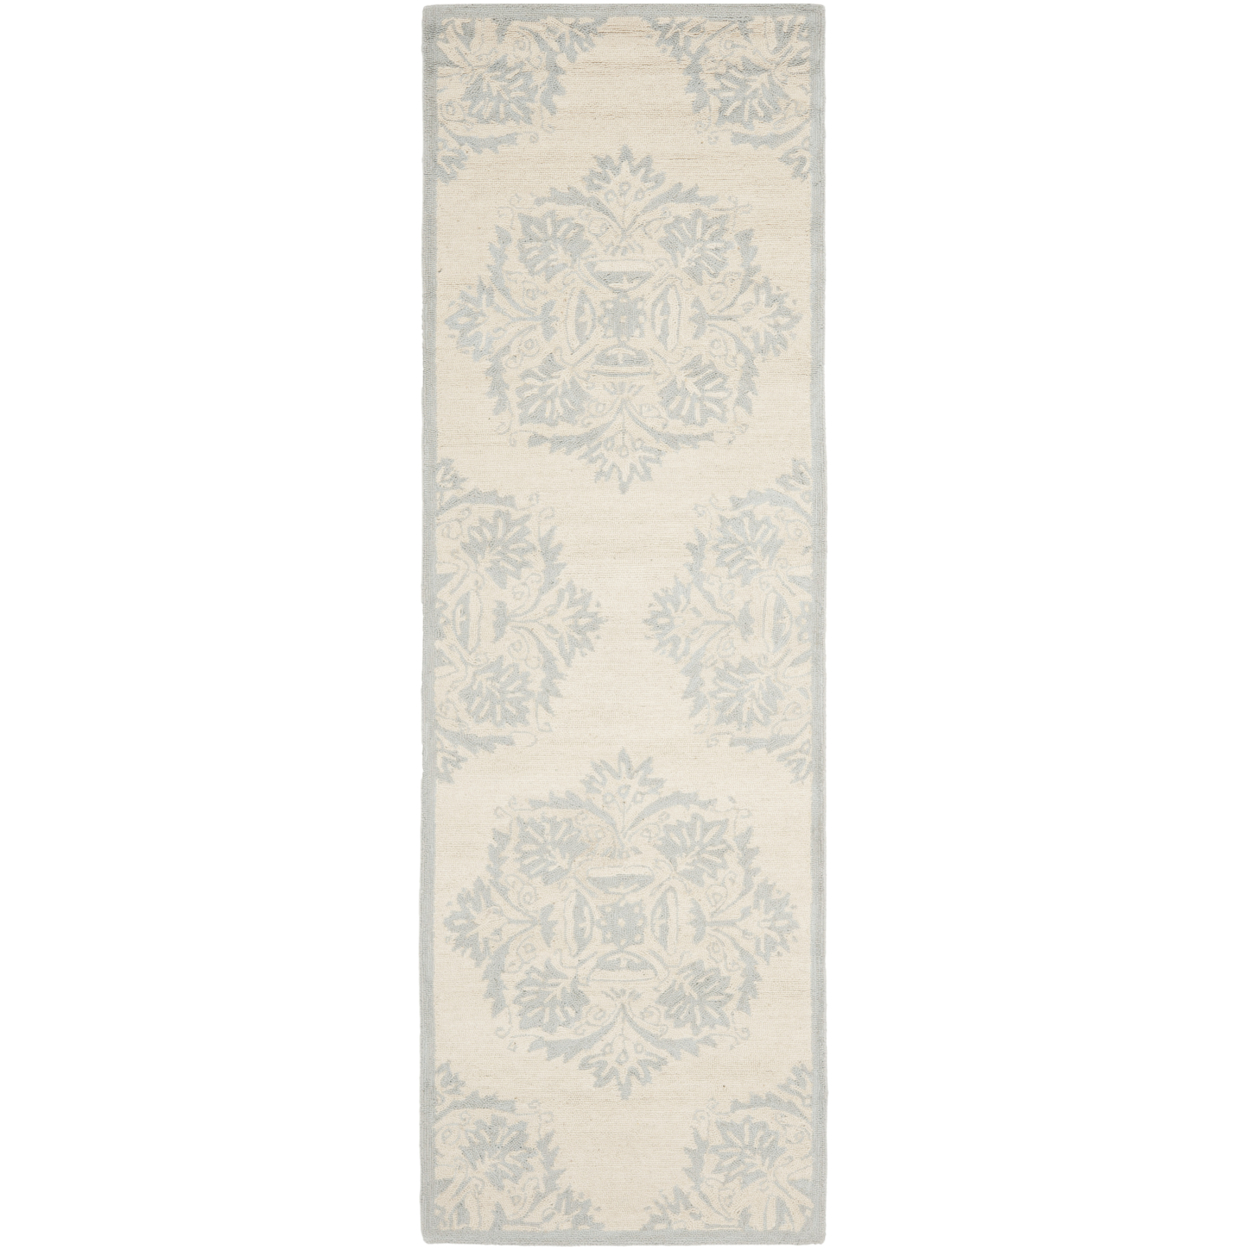 SAFAVIEH Chelsea HK359A Hand-hooked Ivory / Blue Rug - 2' 6 X 8'